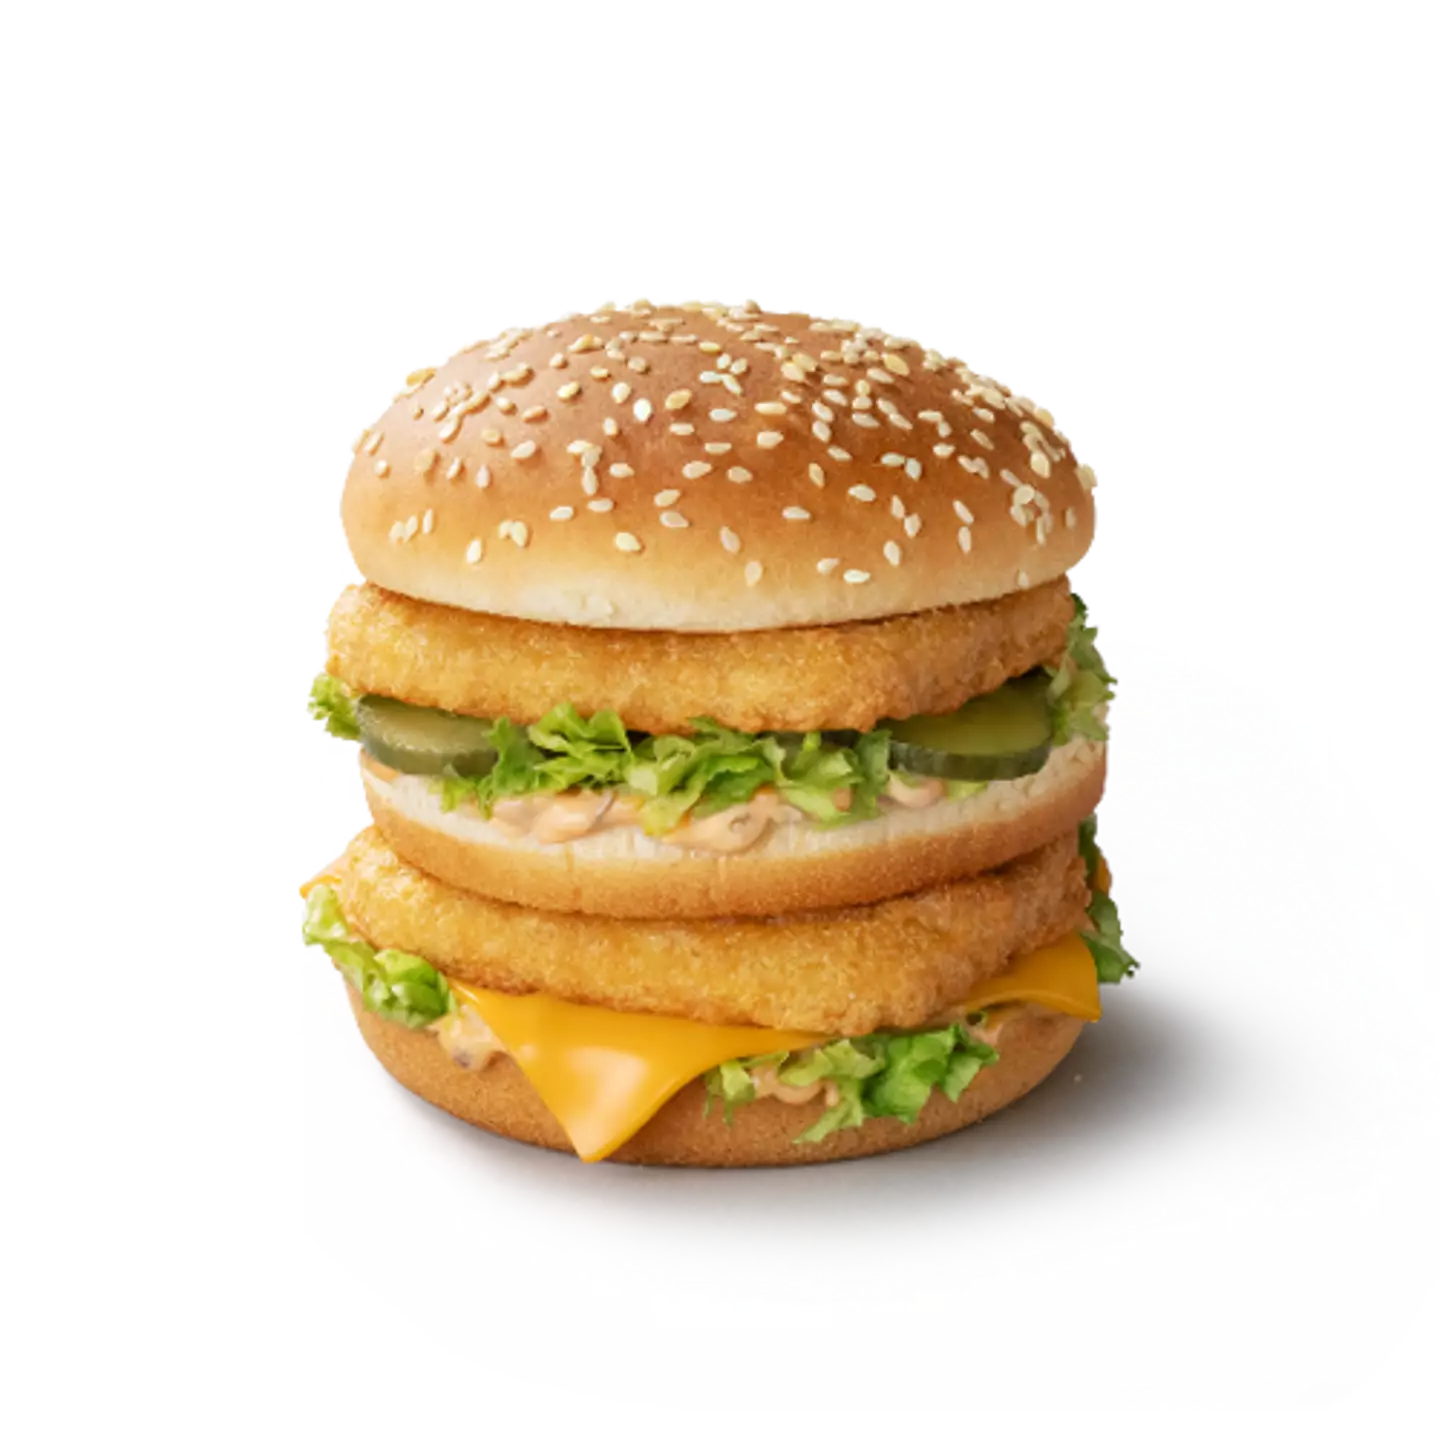 The Chicken Big Mac is coming back.